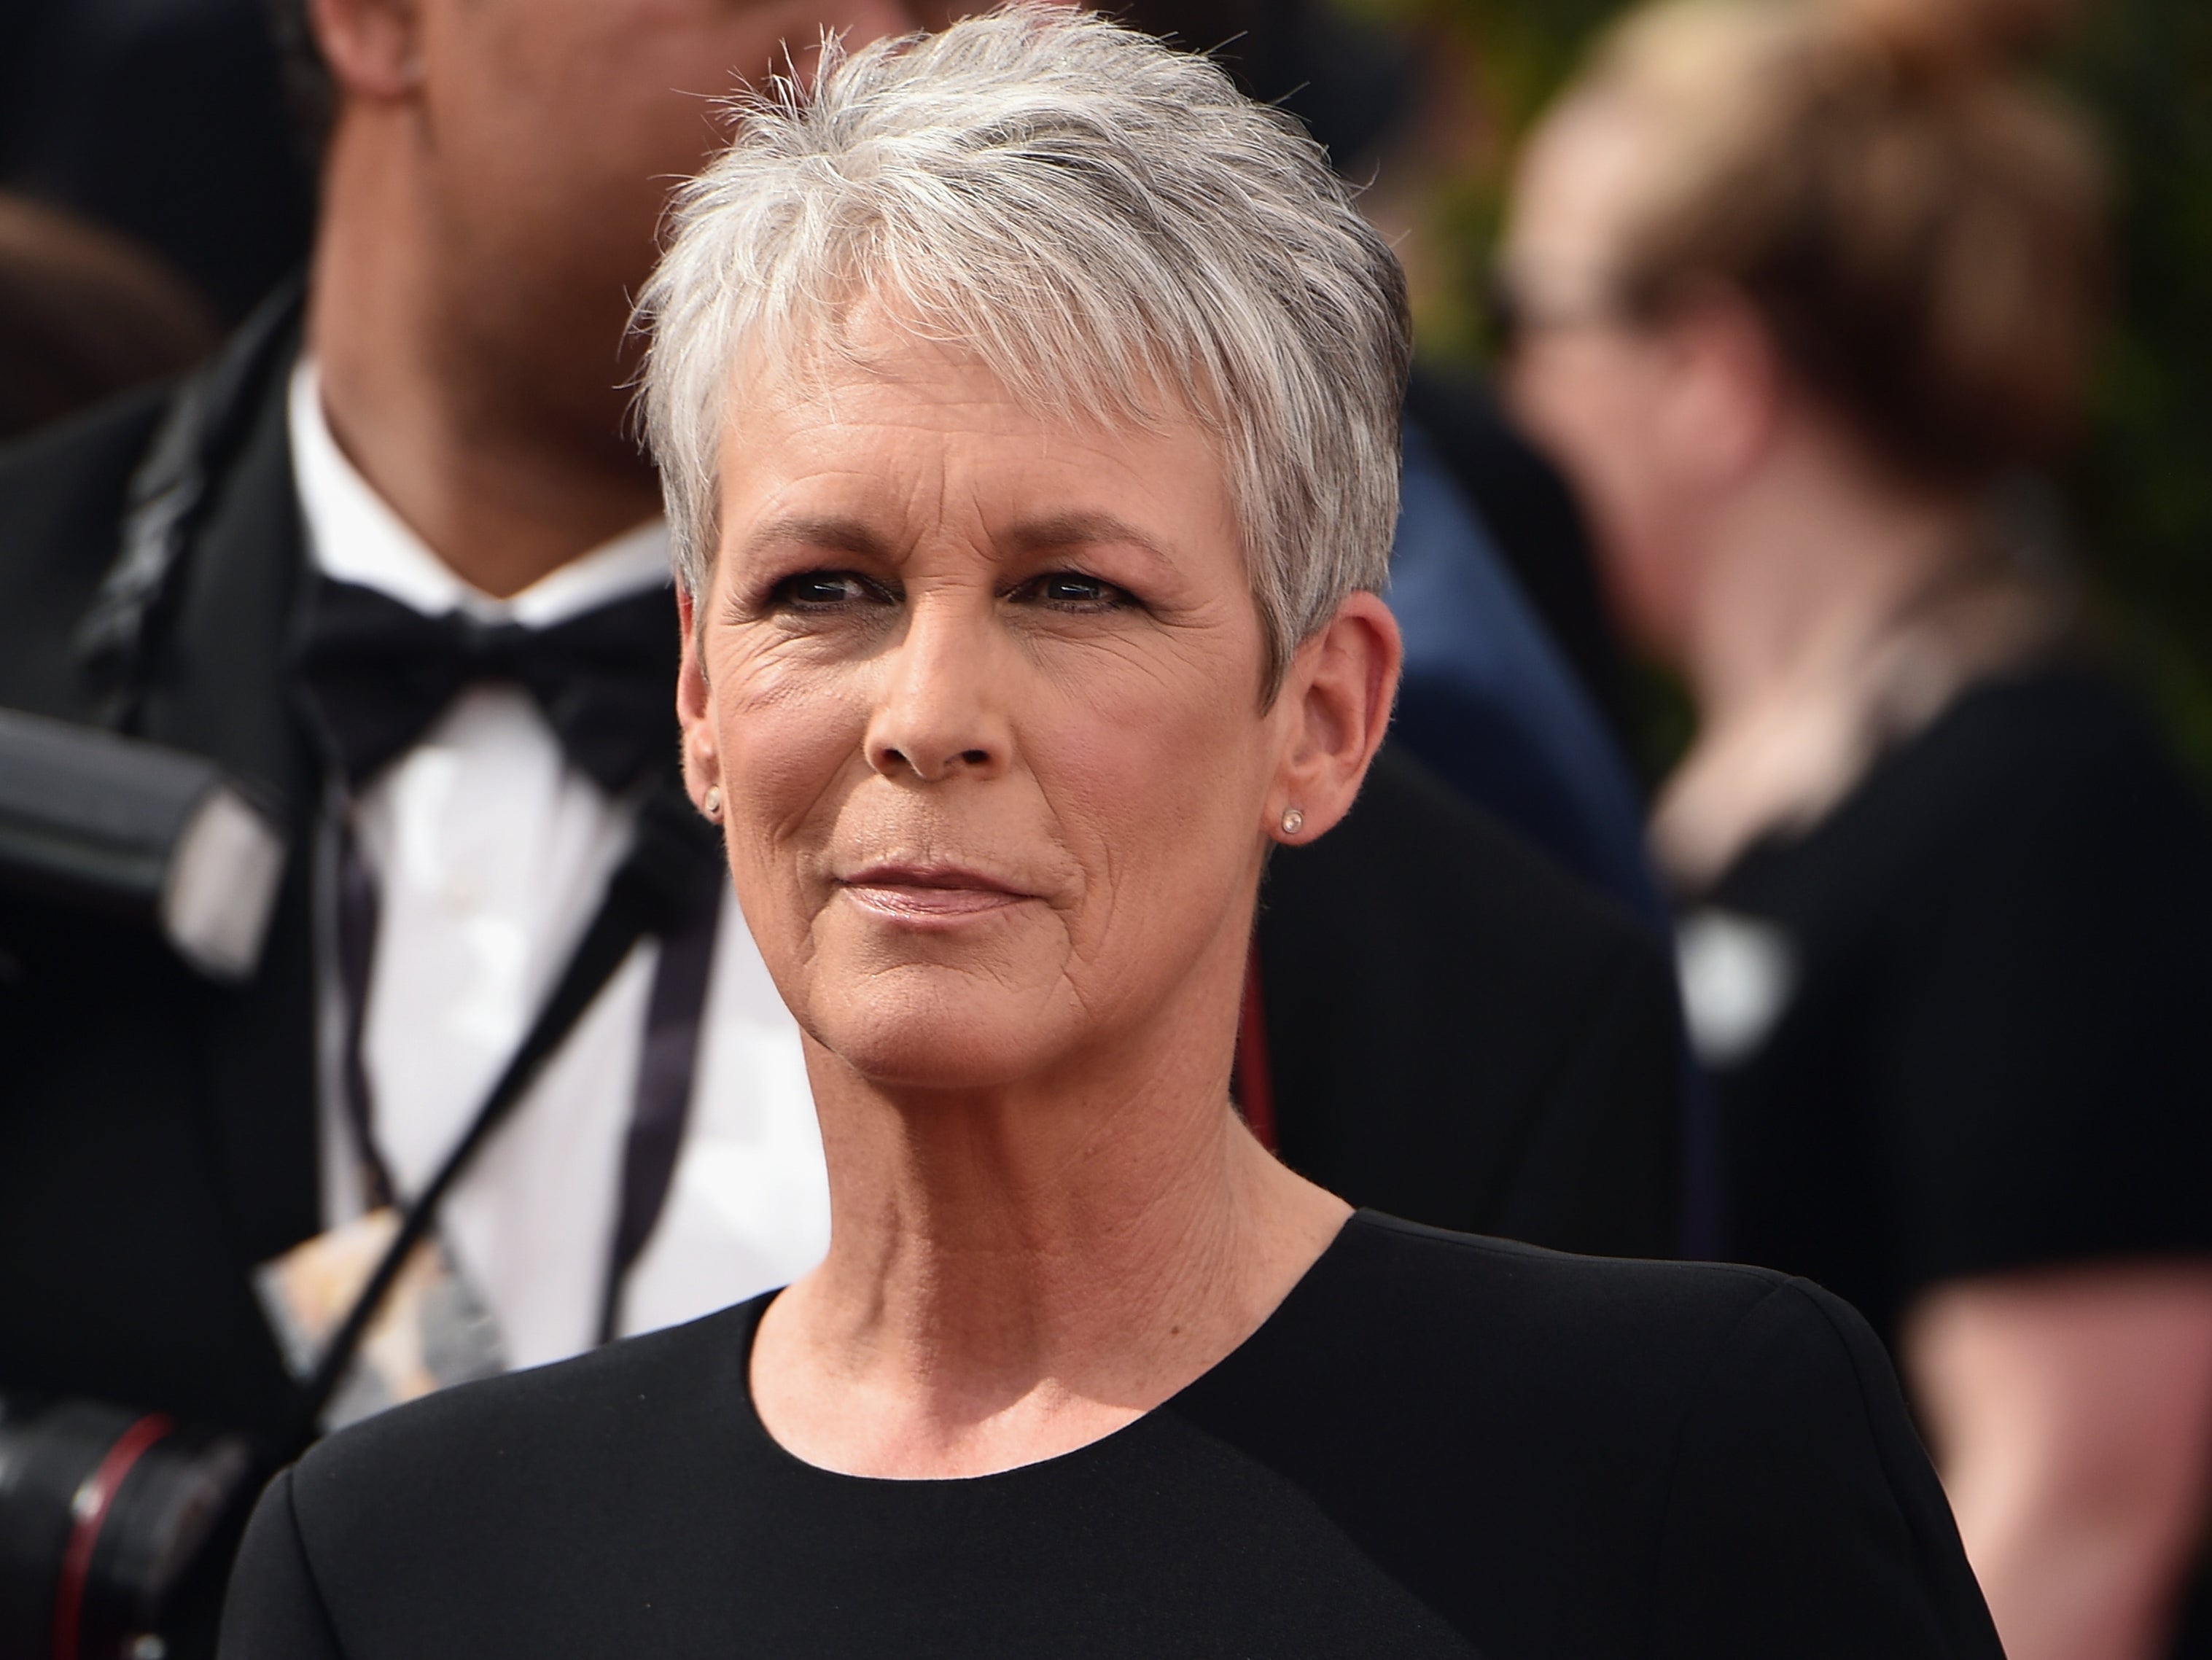 Jamie Lee Curtis has penned an open letter defending a teen sex trafficking victim.